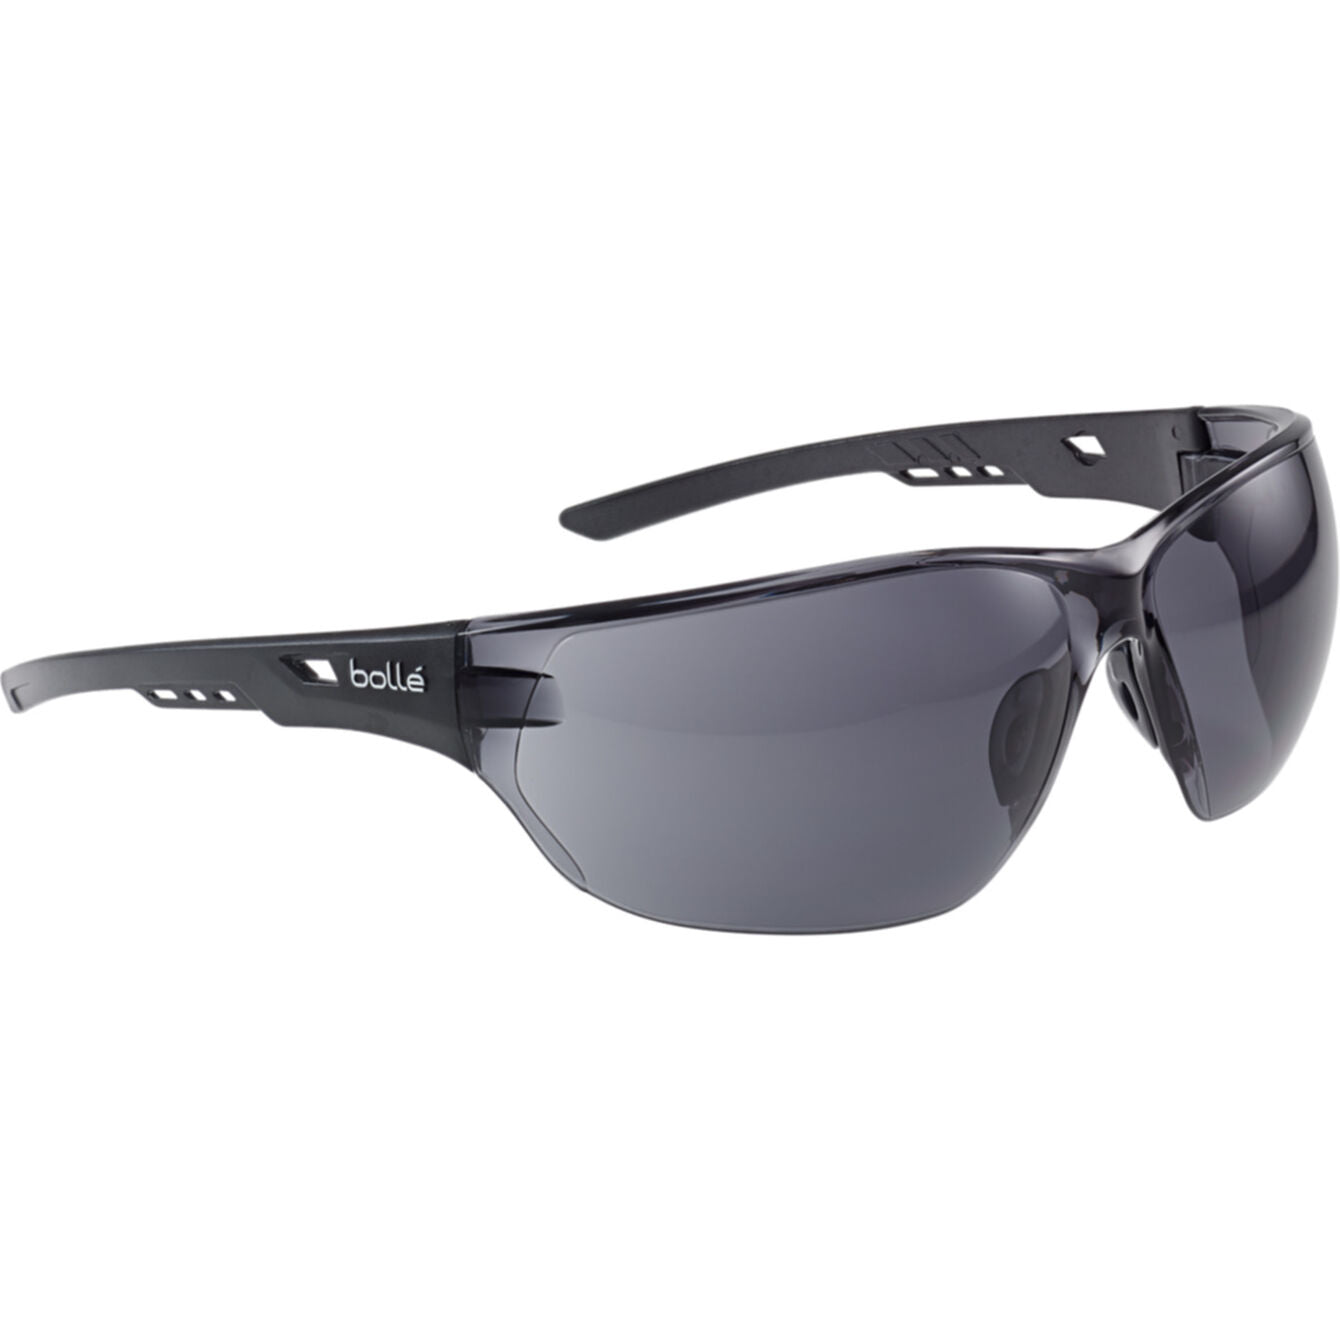 Bolle NESS NESSPSF Safety Glasses Smoke Lens